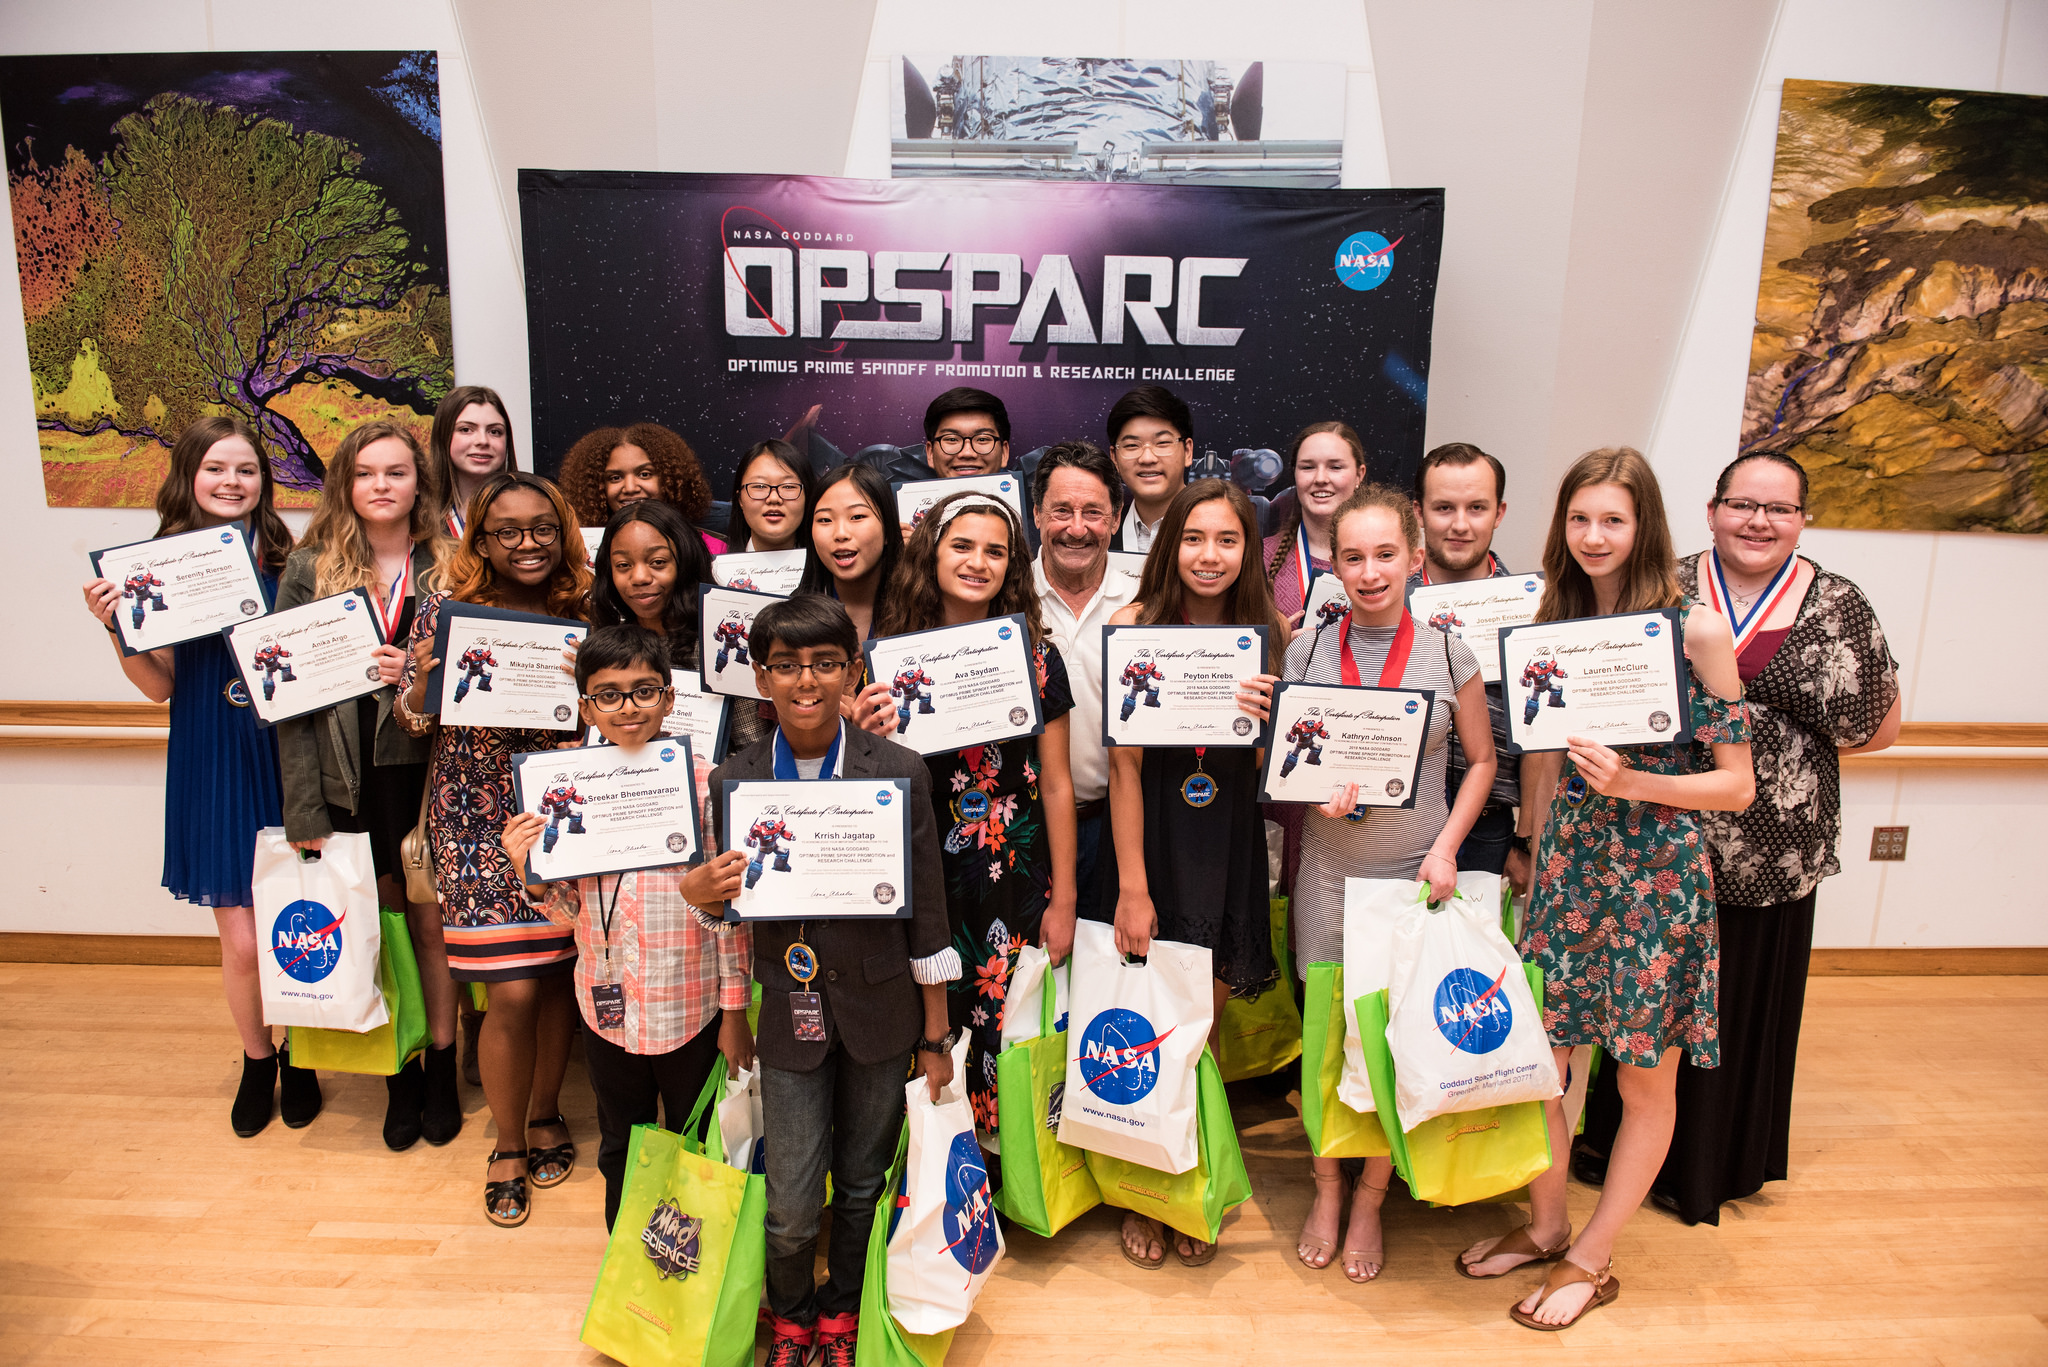 Actor Peter Cullen joins winners of OPSPARC 2018 at the awards ceremony on June 14, 2018.